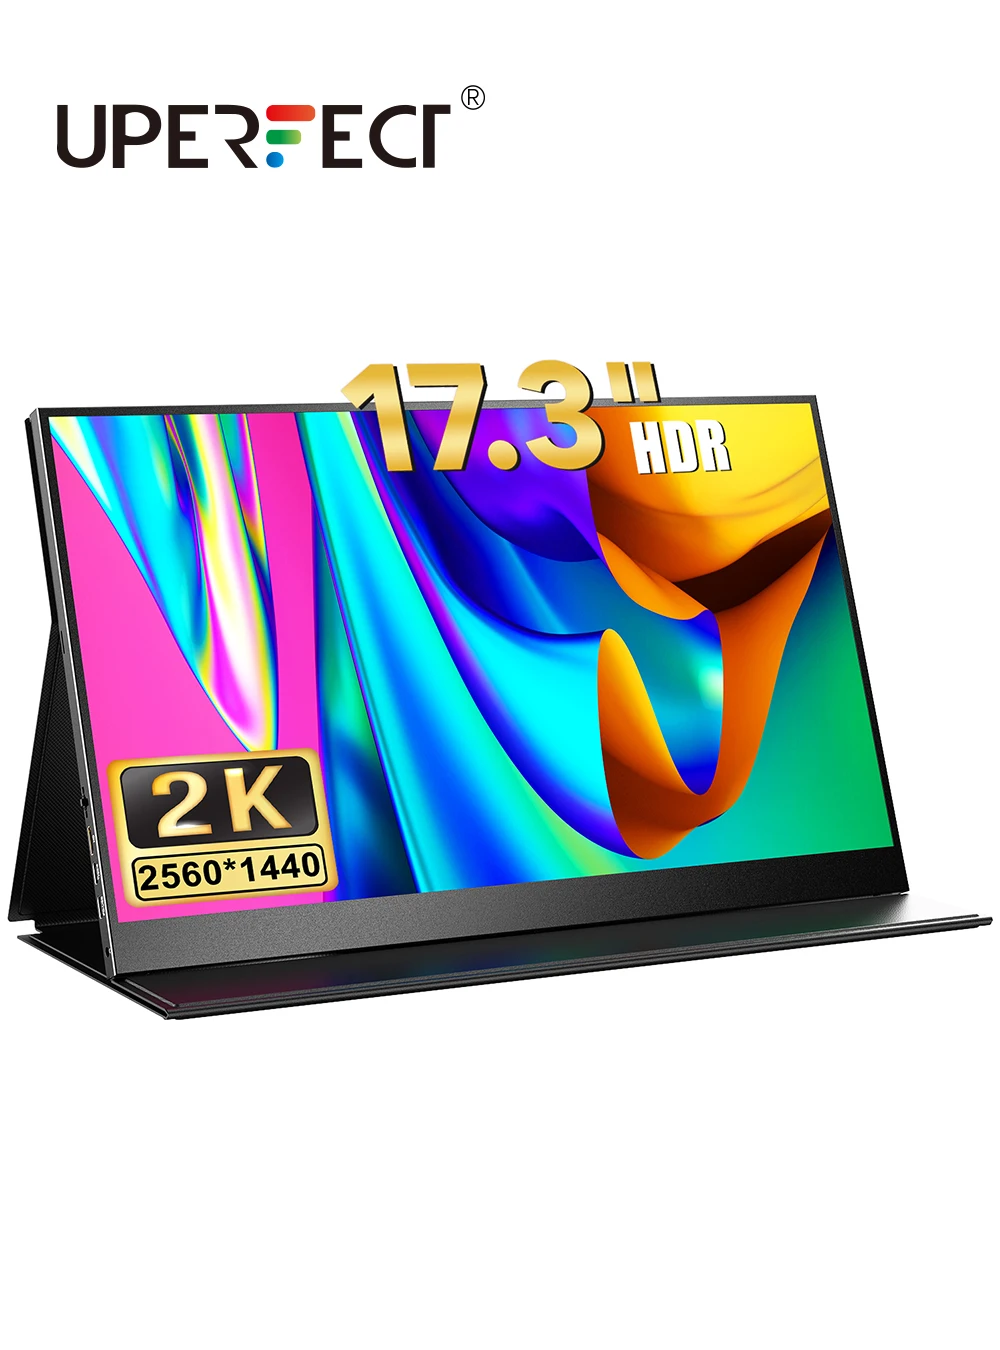 UPERFECT Portable Monitor 2K 17.3 Inch QHD FreeSync HDR IPS 99%sRGB Lightweight Eye Care Computer Display With Type-C Mini HDMI